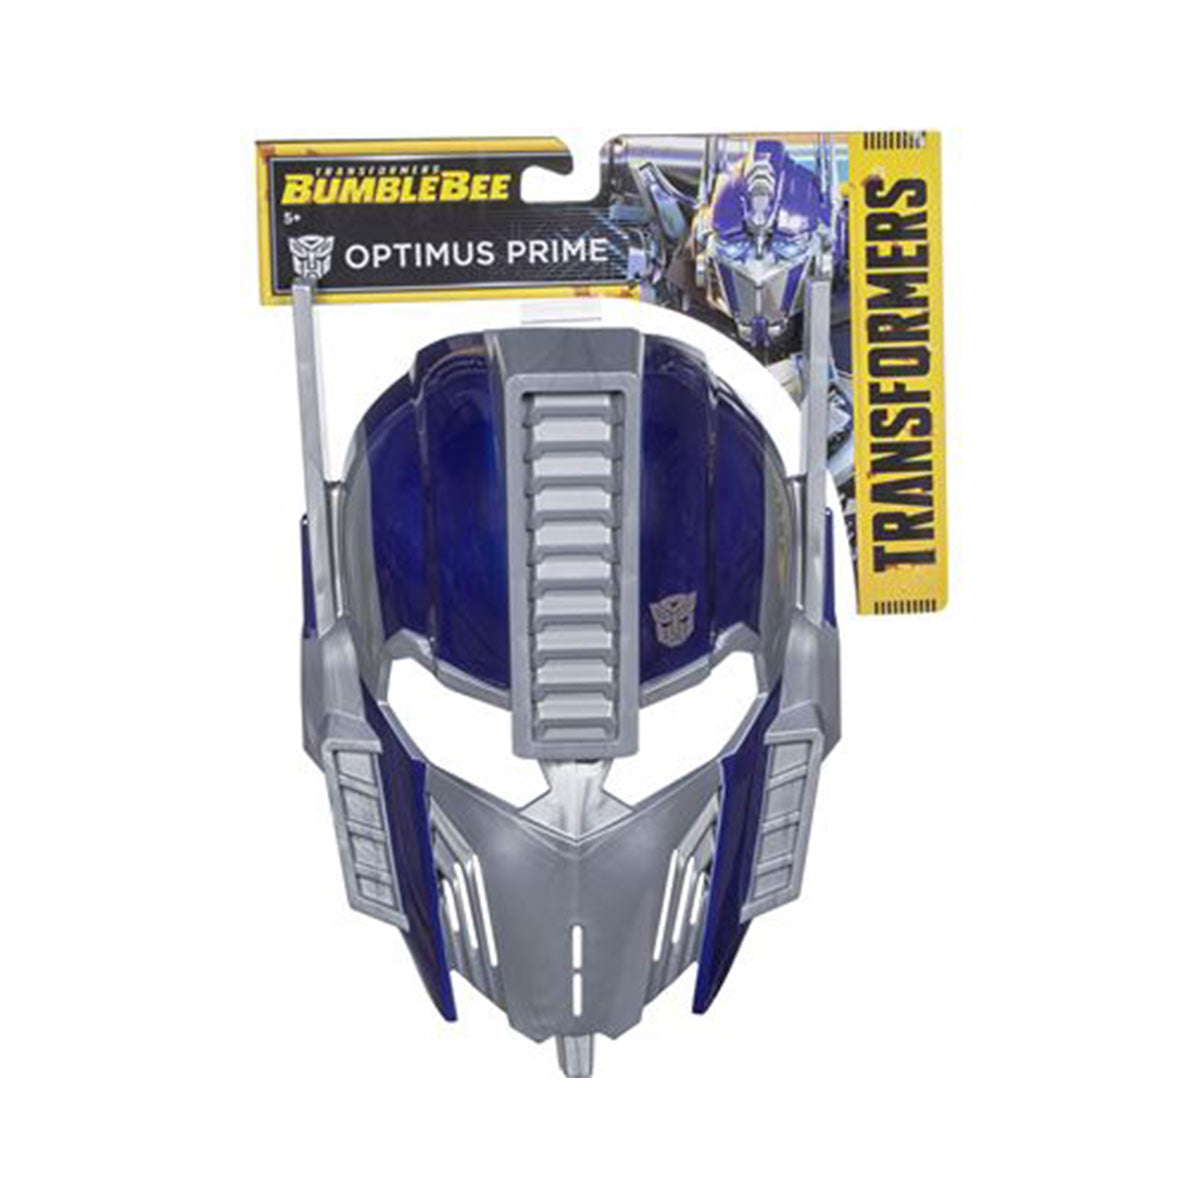 Transformers - Movie 6 Role Play Mask (Styles Vary - One Supplied)